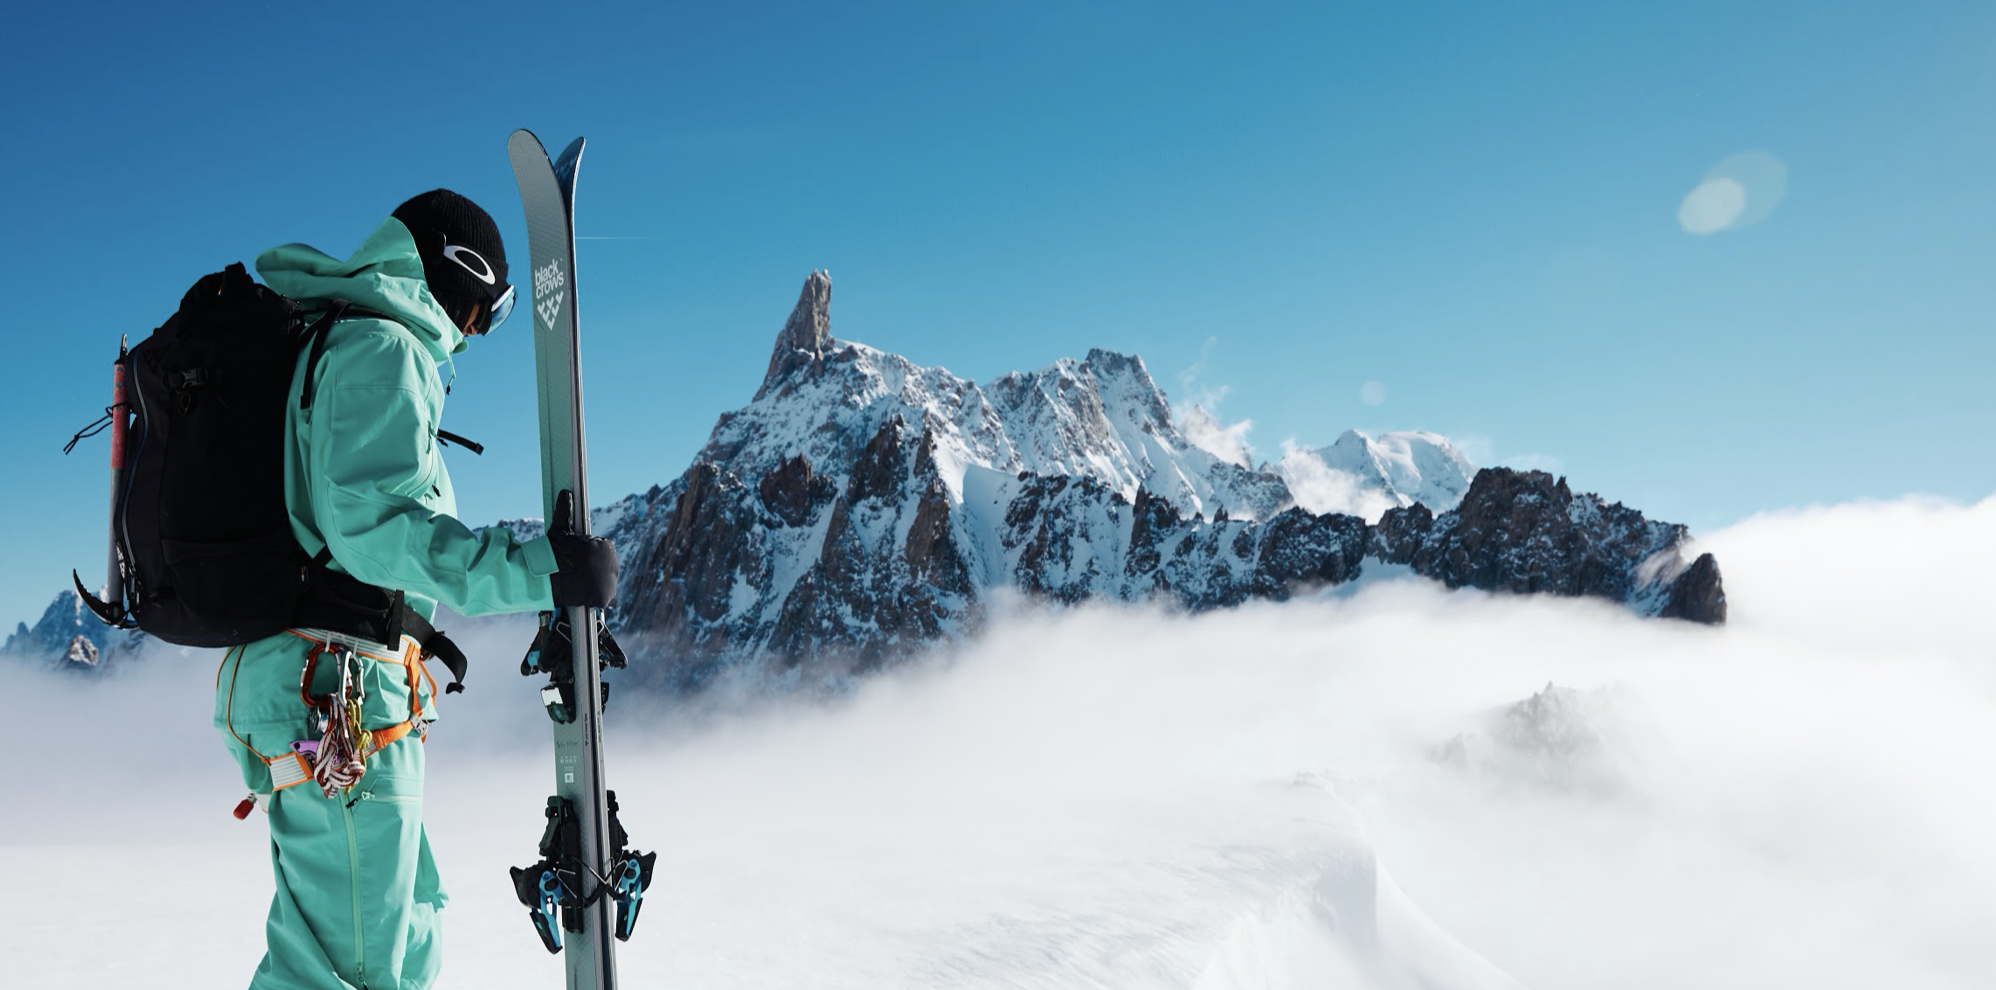 THE BEST SKIS FOR VERBIER